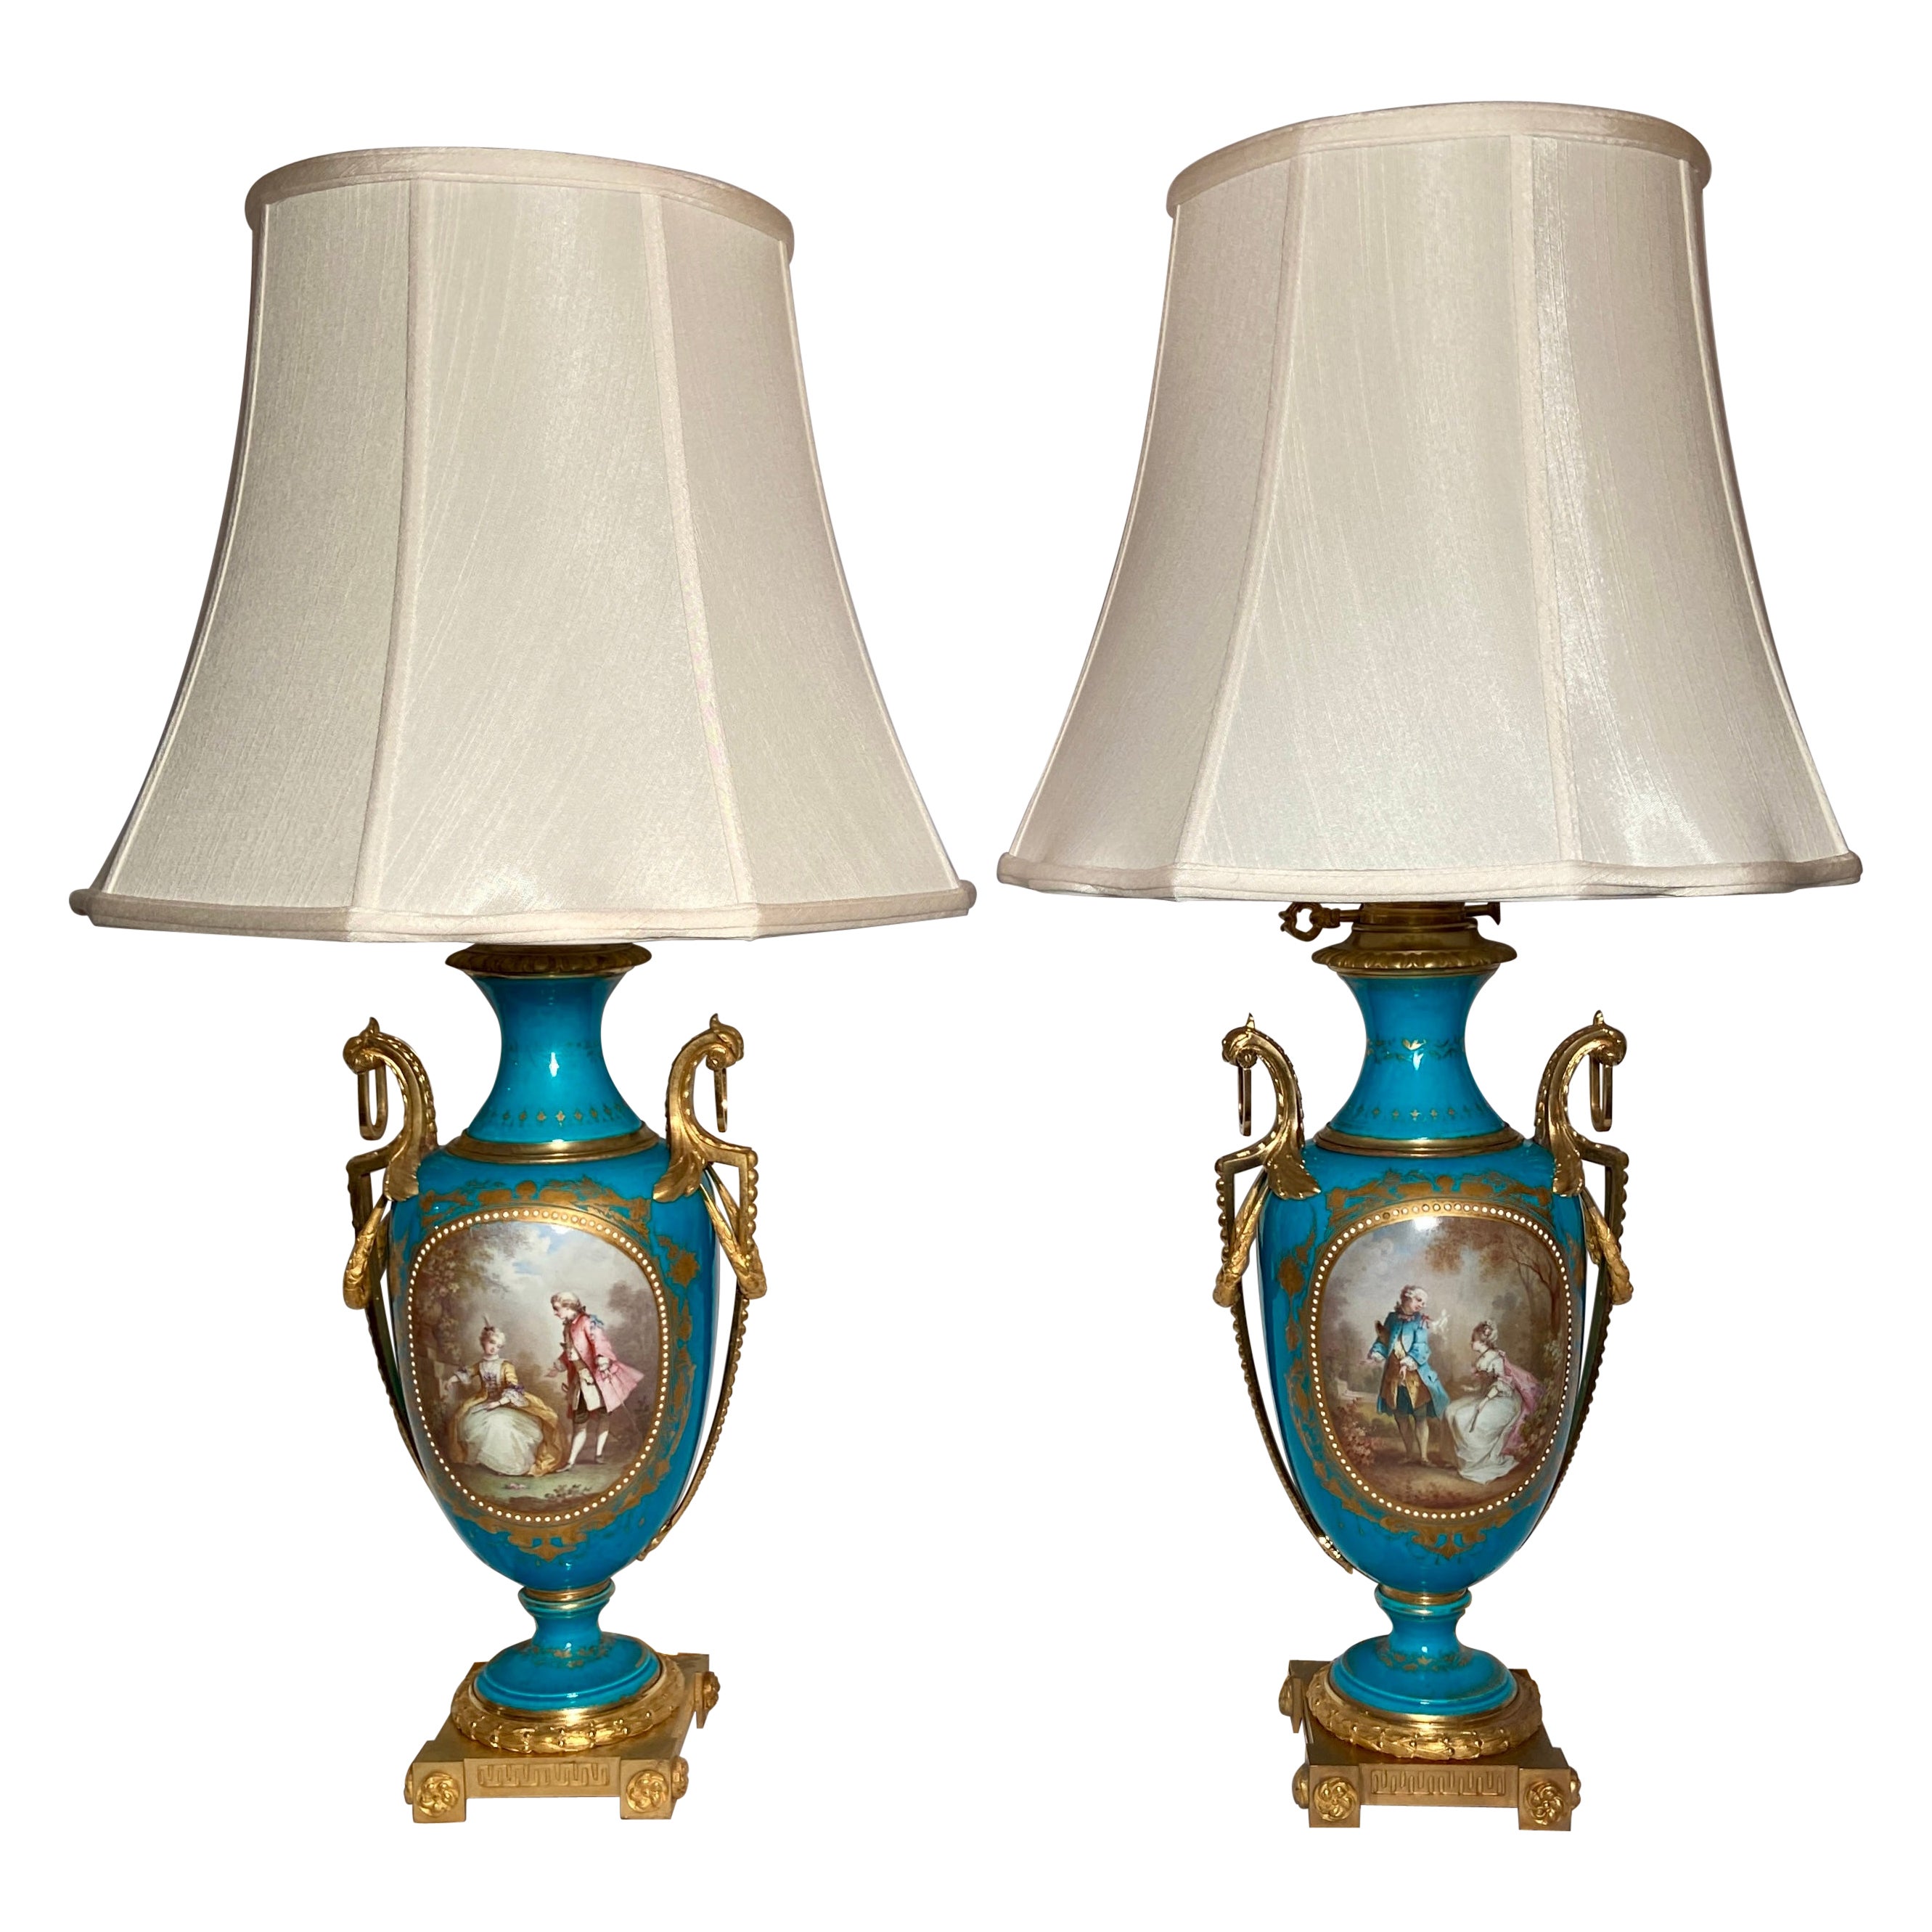 Pair Antique French Ormolu Mounted Blue Porcelain "Jewel" Detail Lamps, Ca. 1880